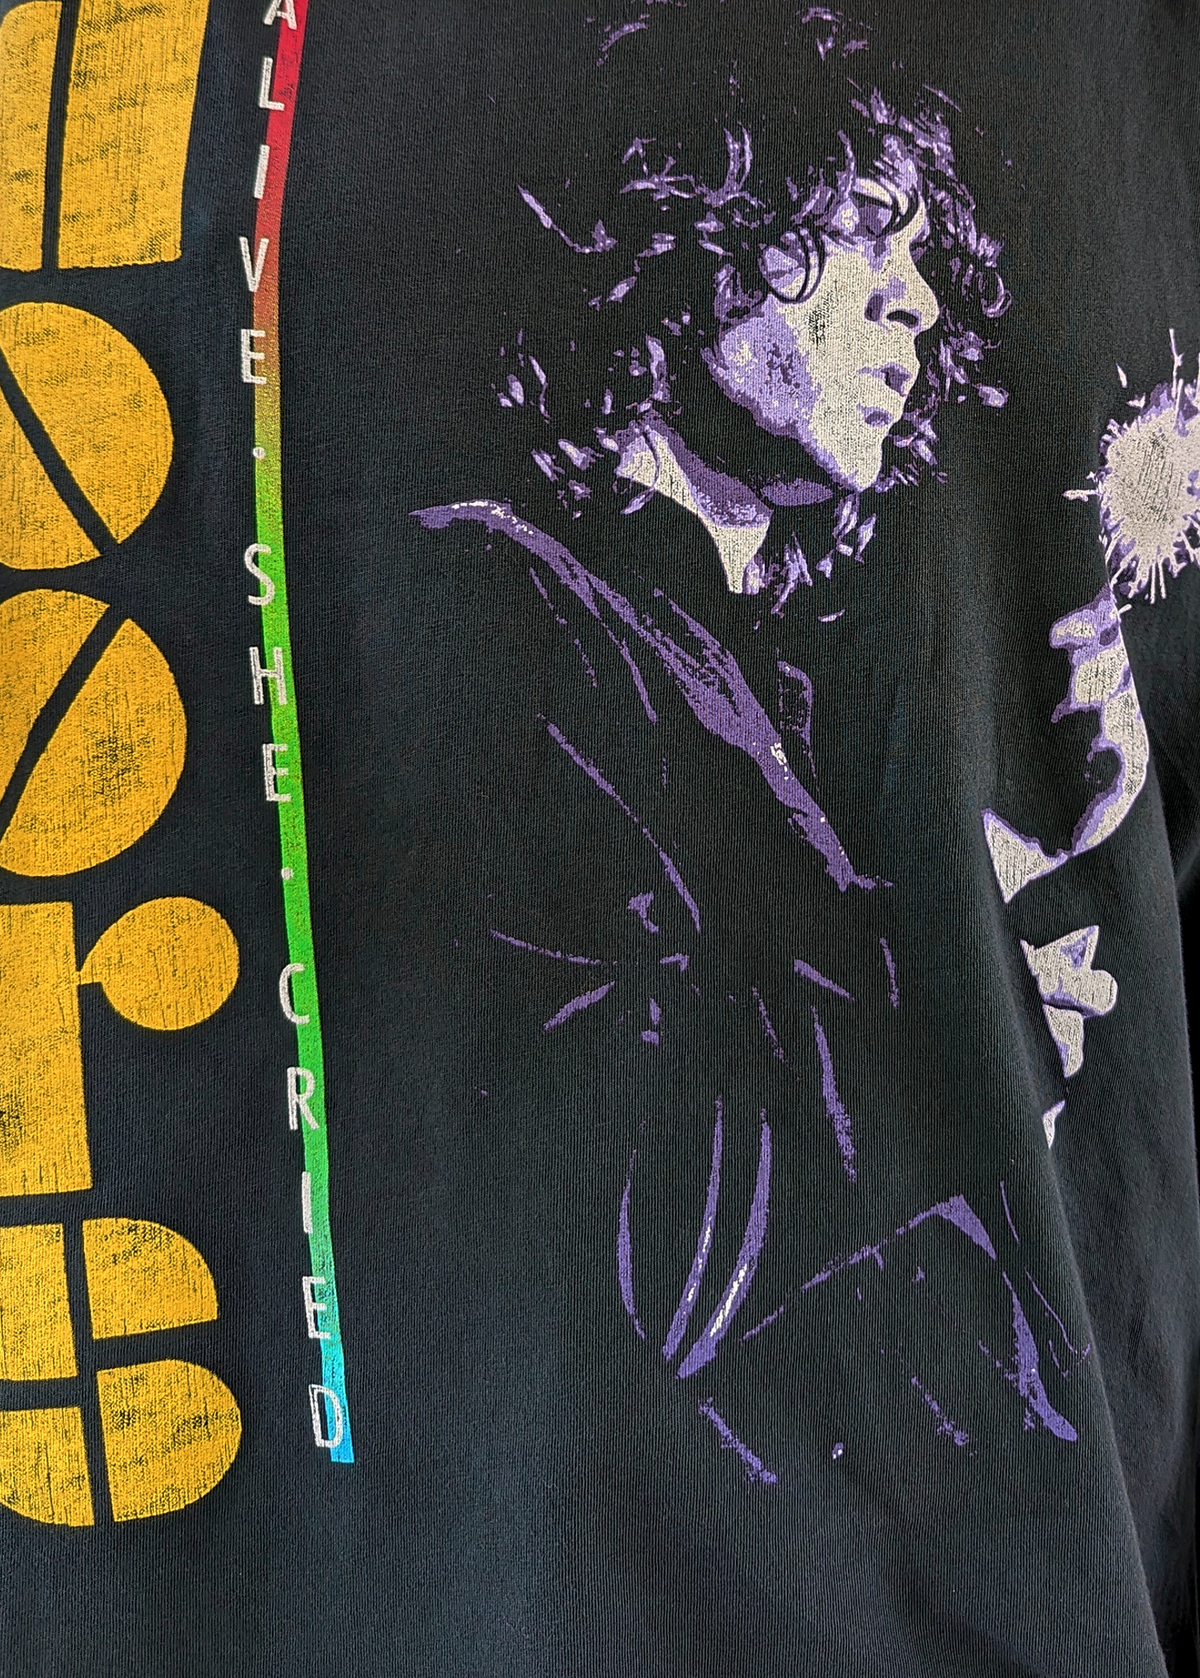 Daydreamer LA The Doors Jim Morrison Alive She Cried One Size Oversized Tee. Made in California and officially licensed